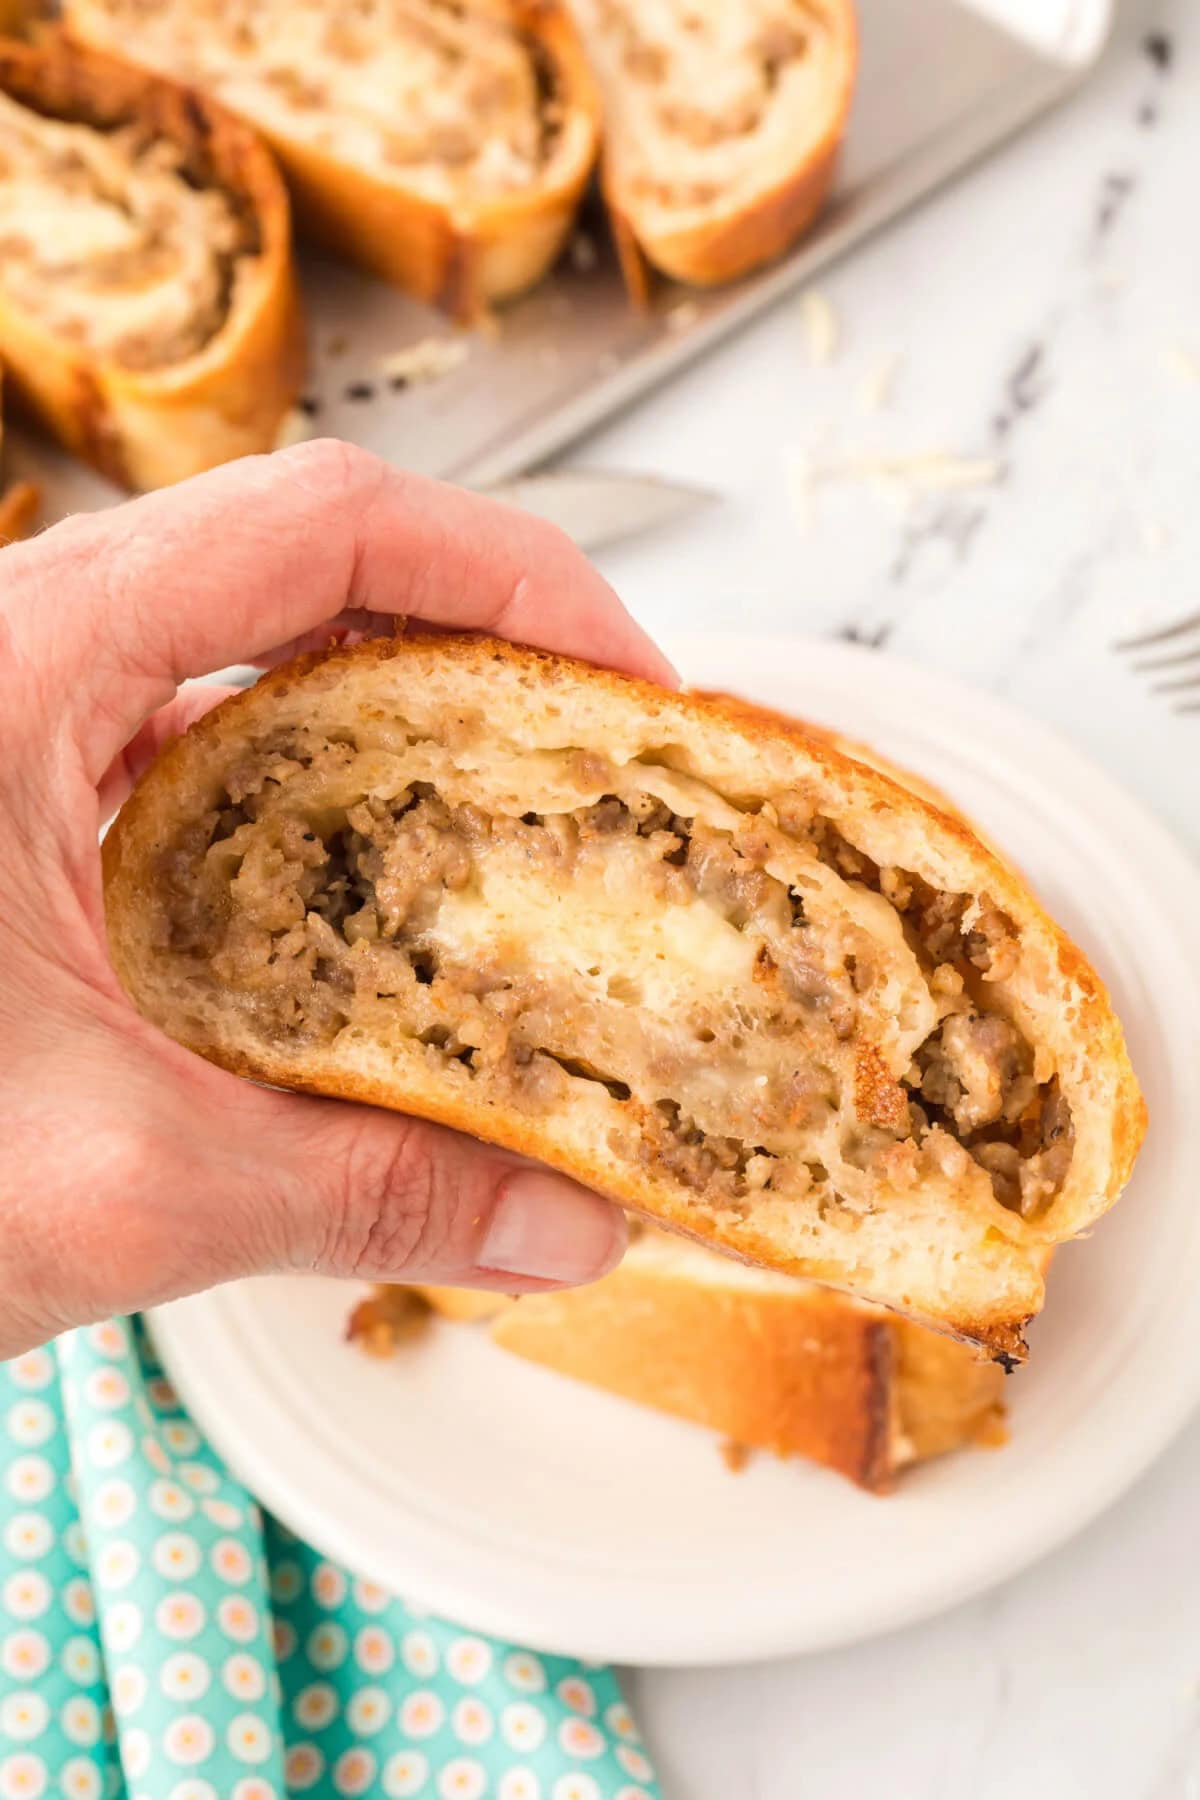 A close-up of a hand holding a slice of homemade sausage bread, revealing its savory minced meat and onion filling encased in a golden-brown crust, offering an easy dinner idea for busy families.